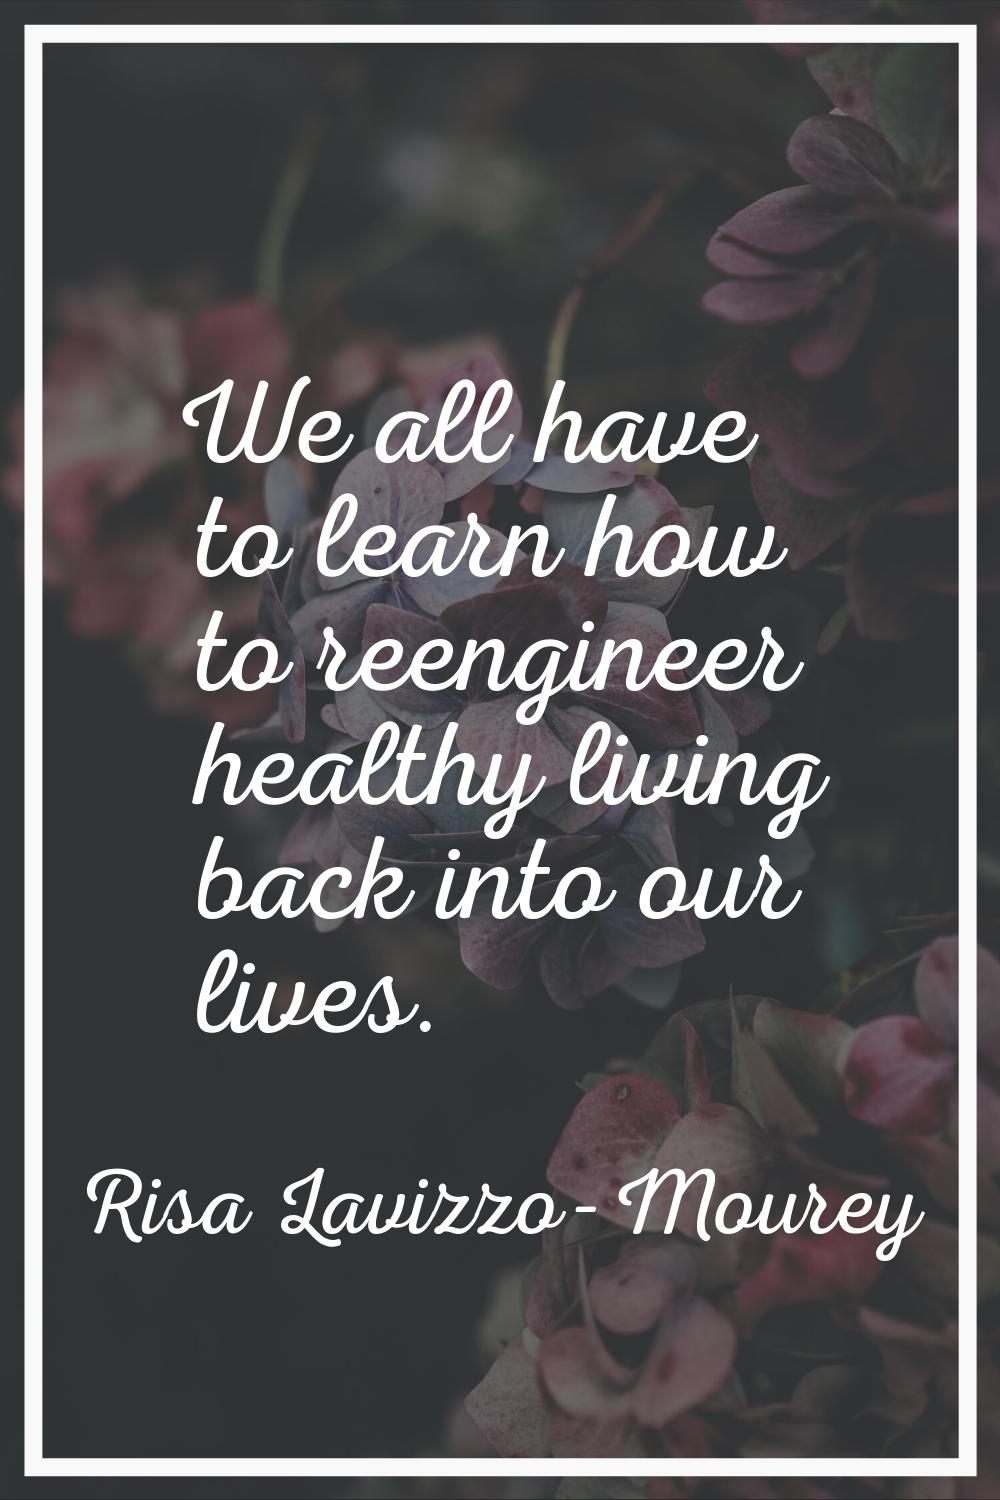 We all have to learn how to reengineer healthy living back into our lives.